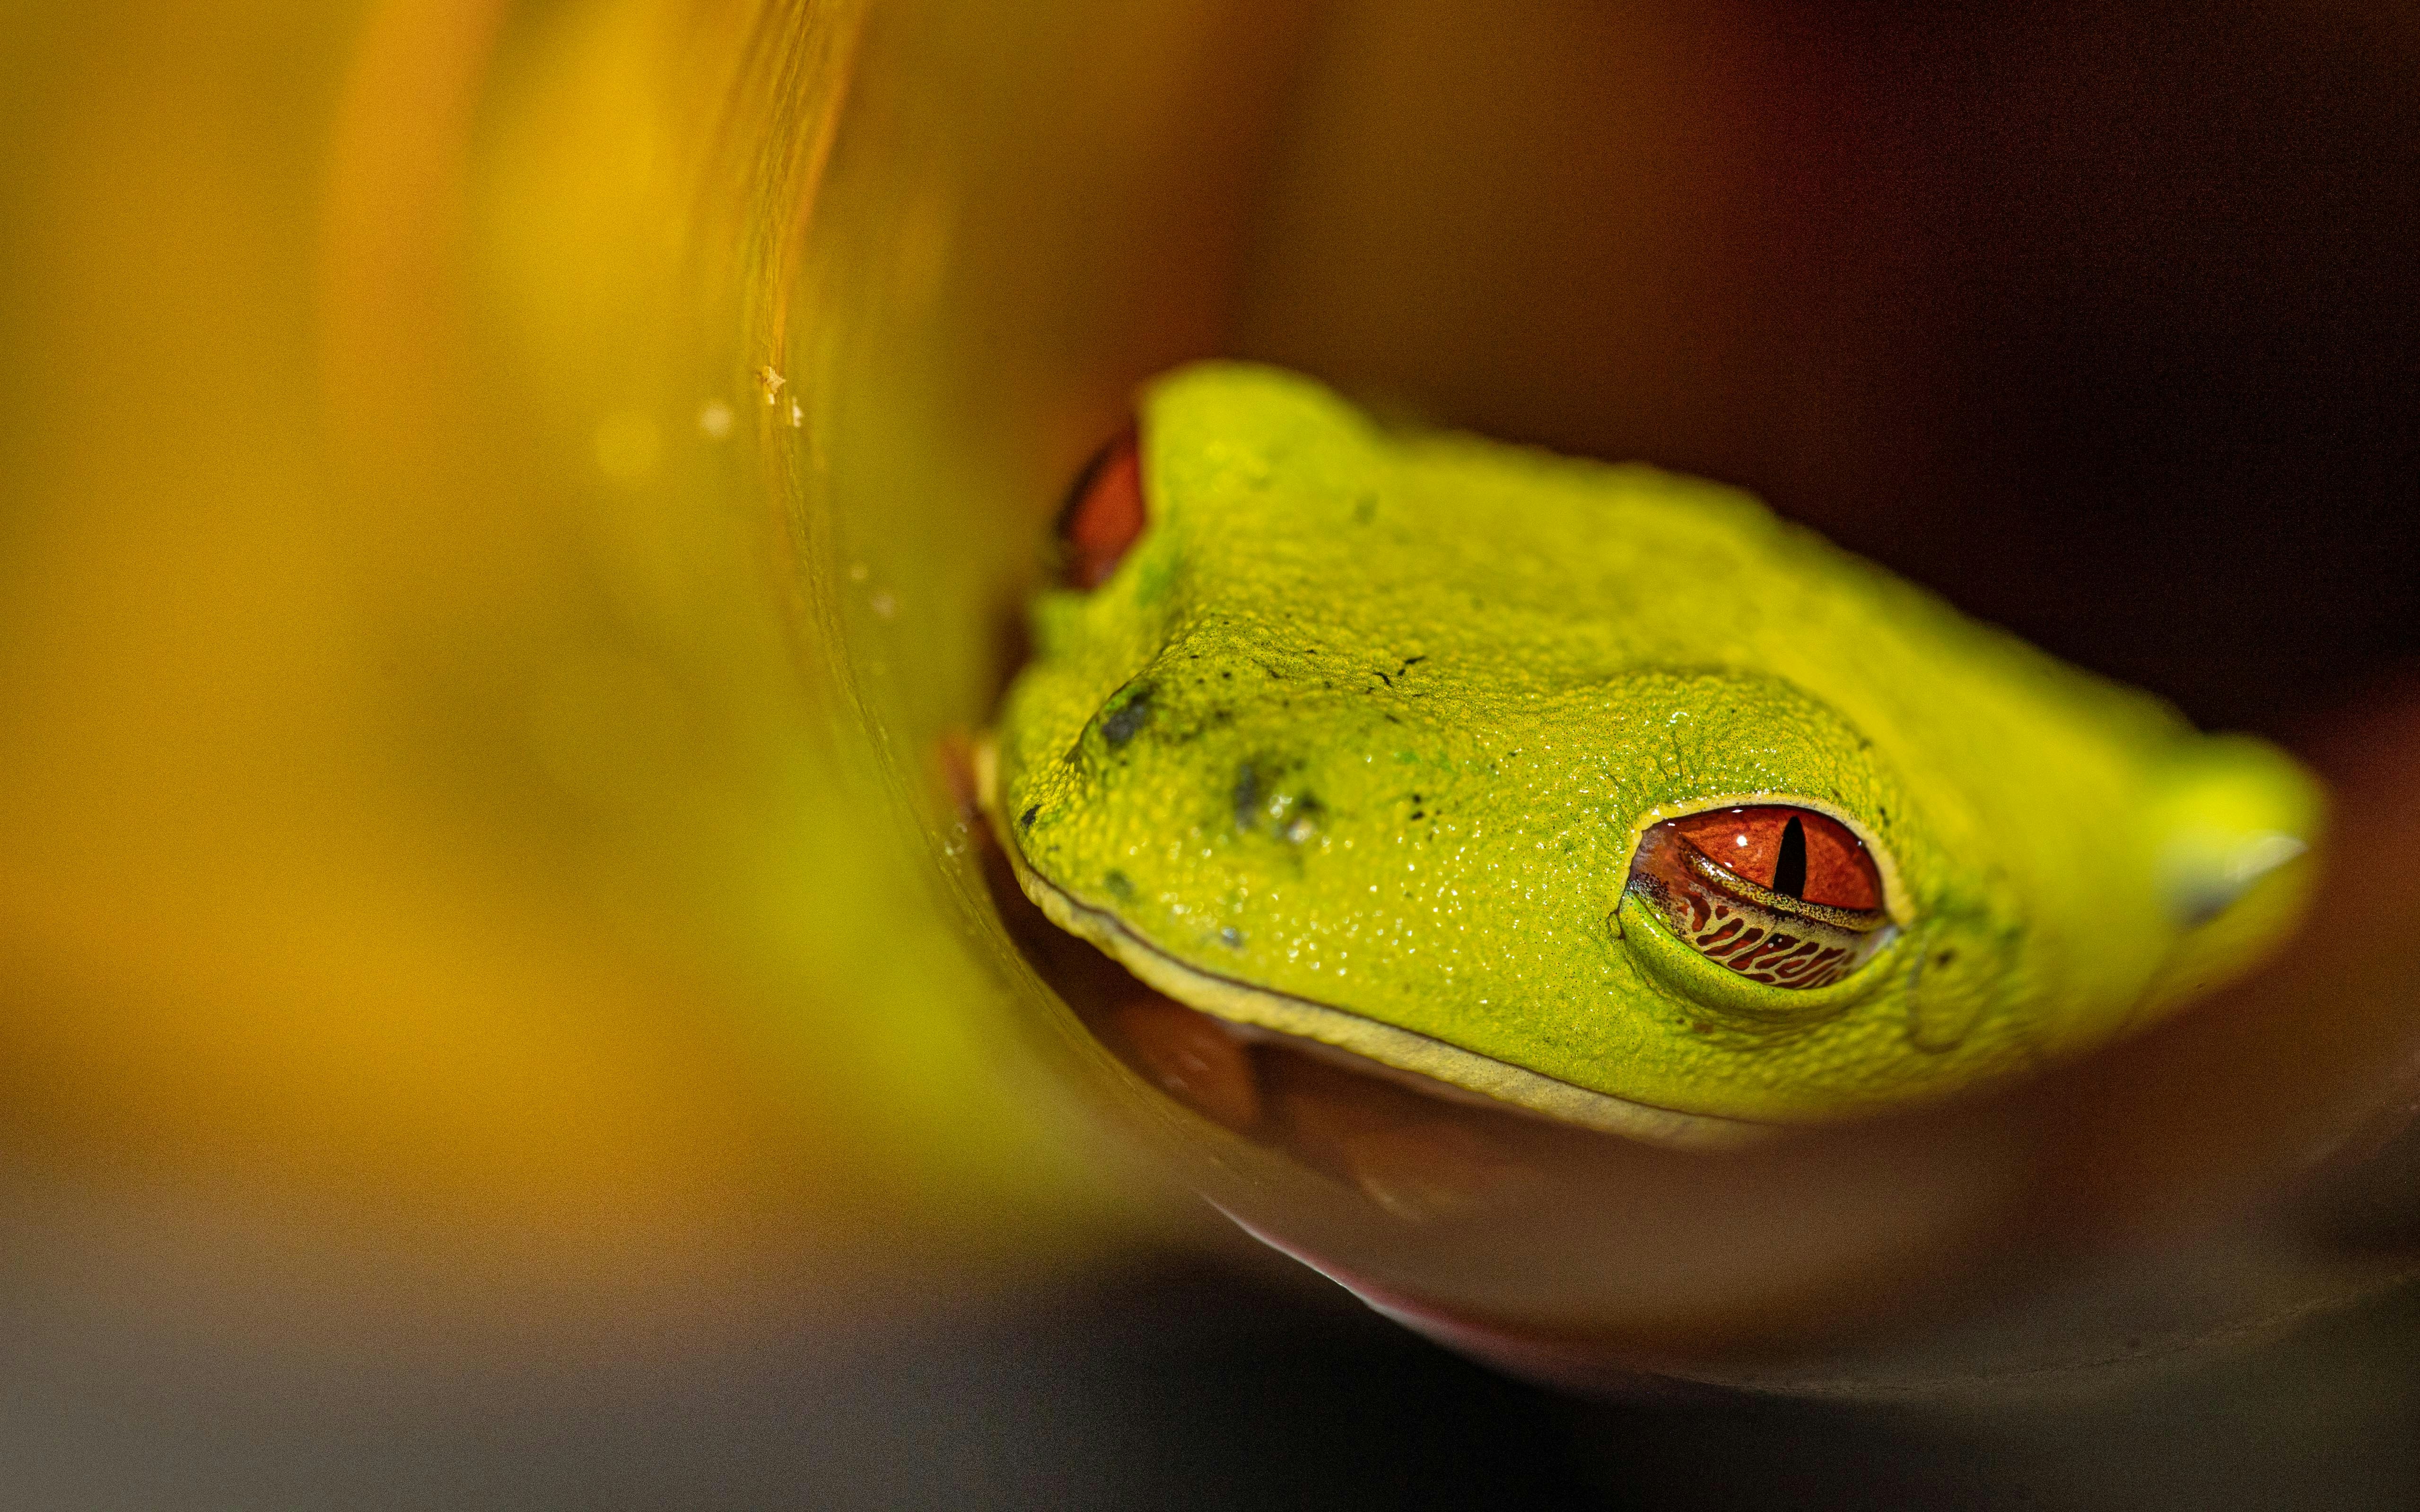 green frog in water in close up photography